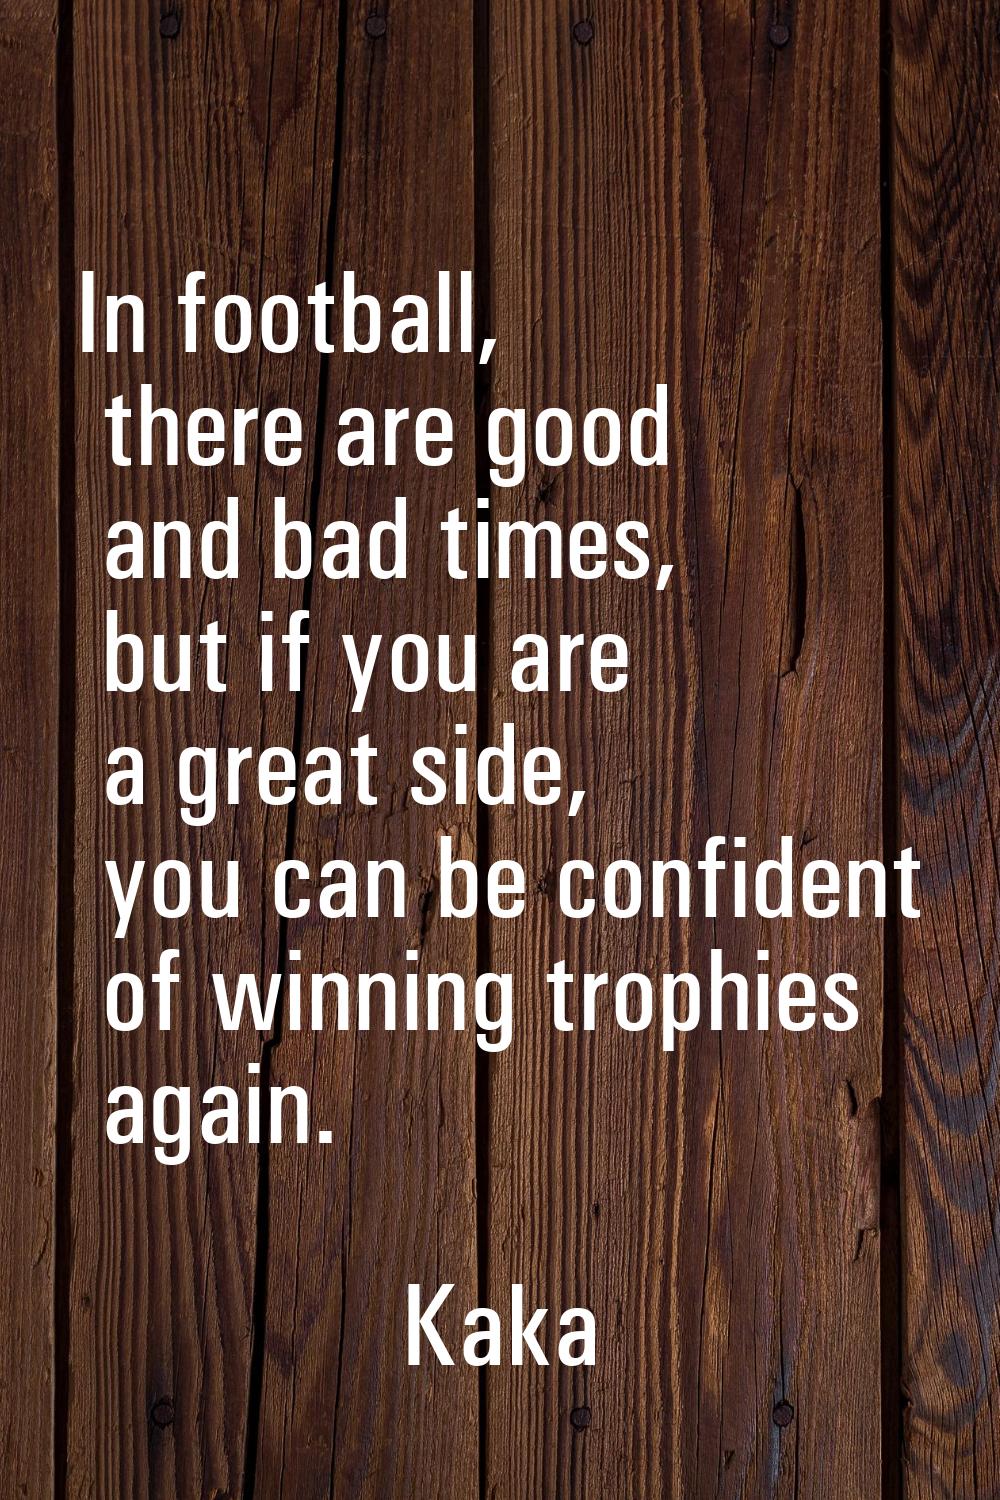 In football, there are good and bad times, but if you are a great side, you can be confident of win